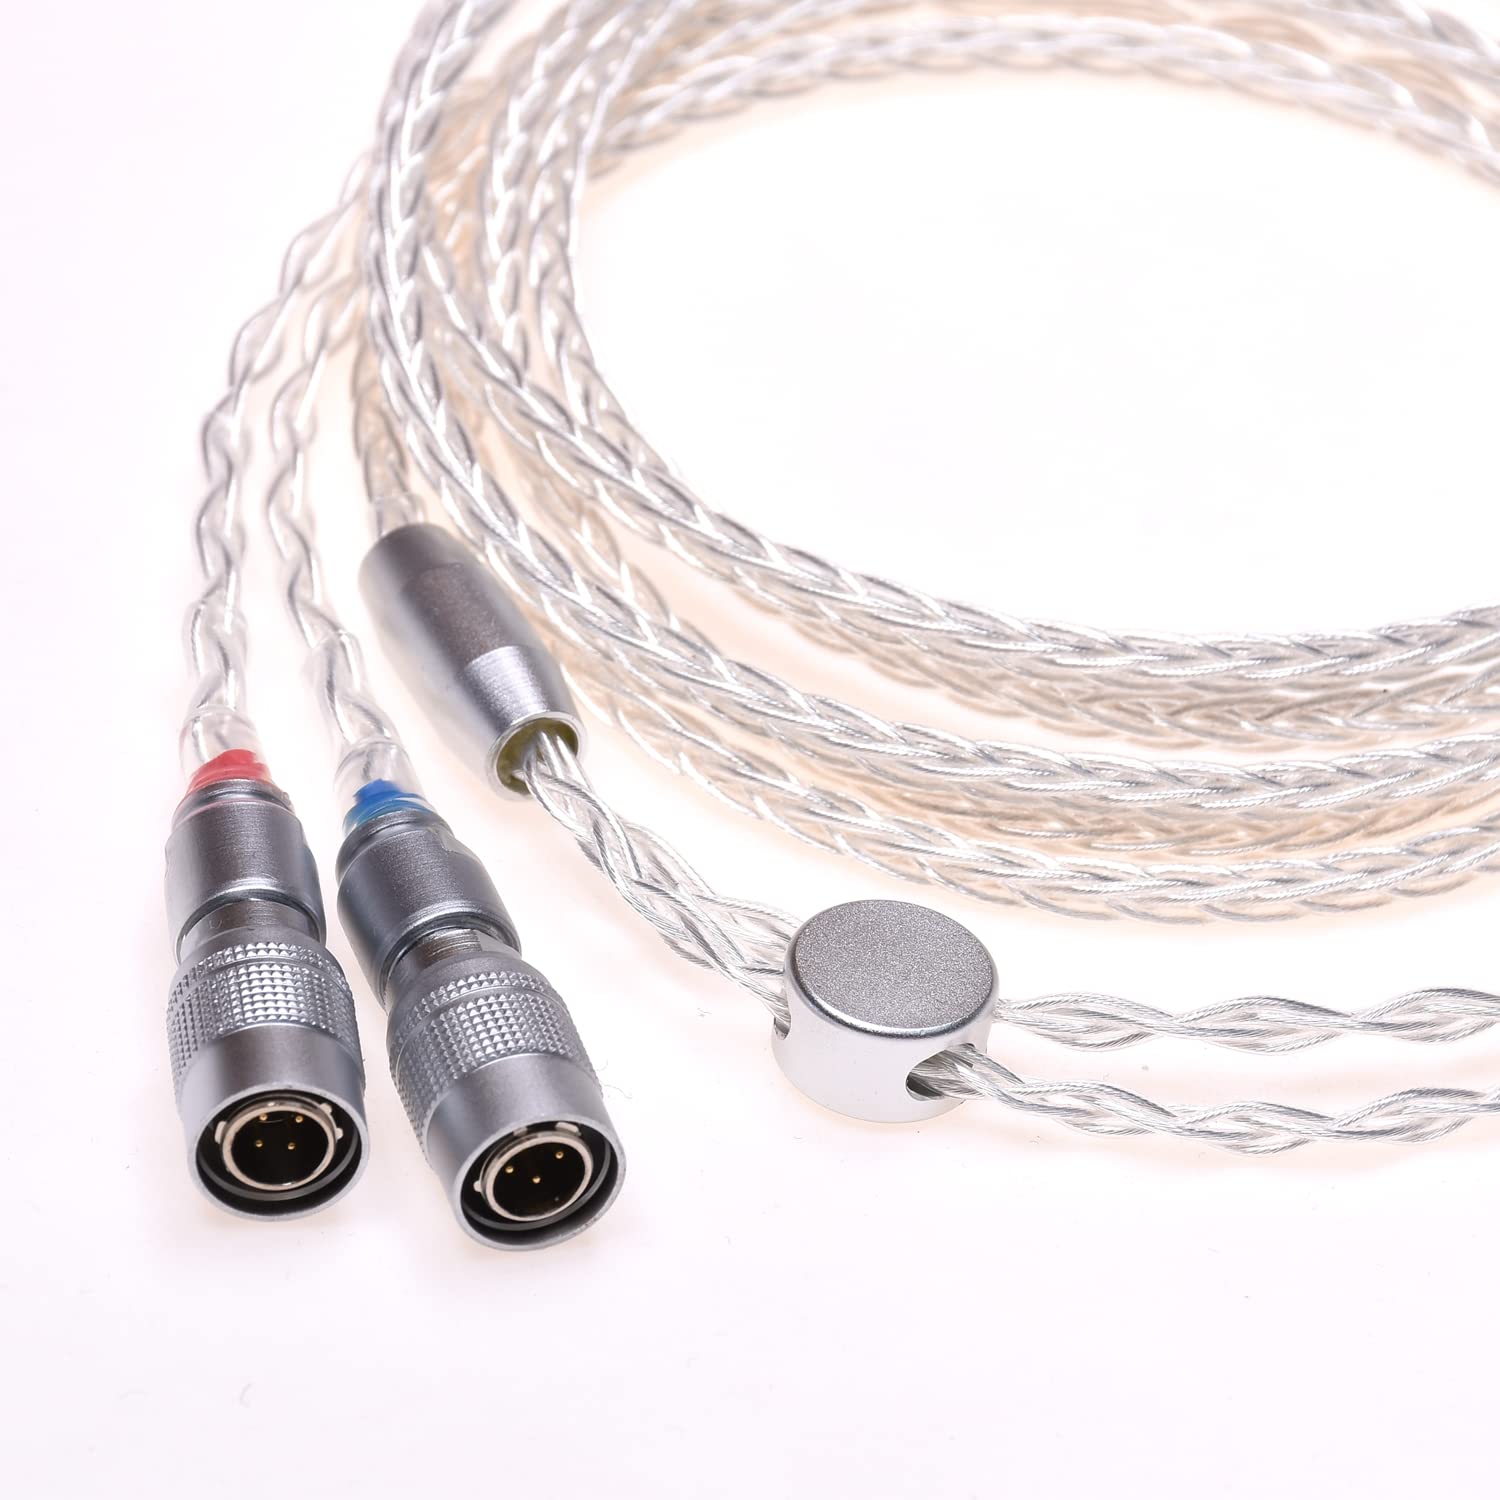 When Is A Core Needed On An Audio Cable